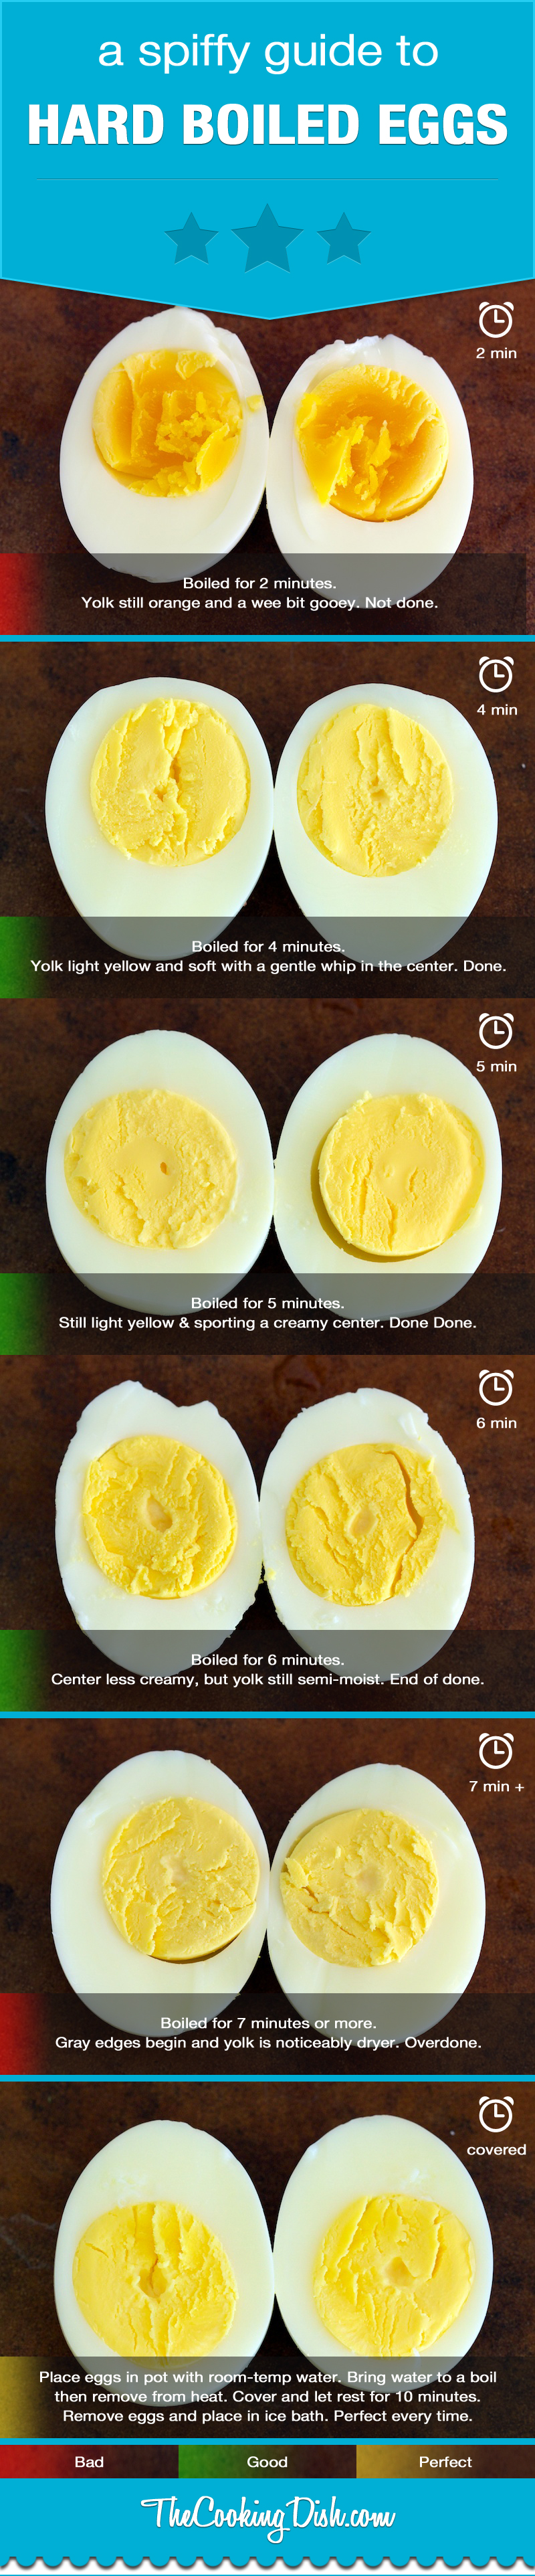 how-to-hard-boil-an-egg-infographic-the-cooking-dish.jpg